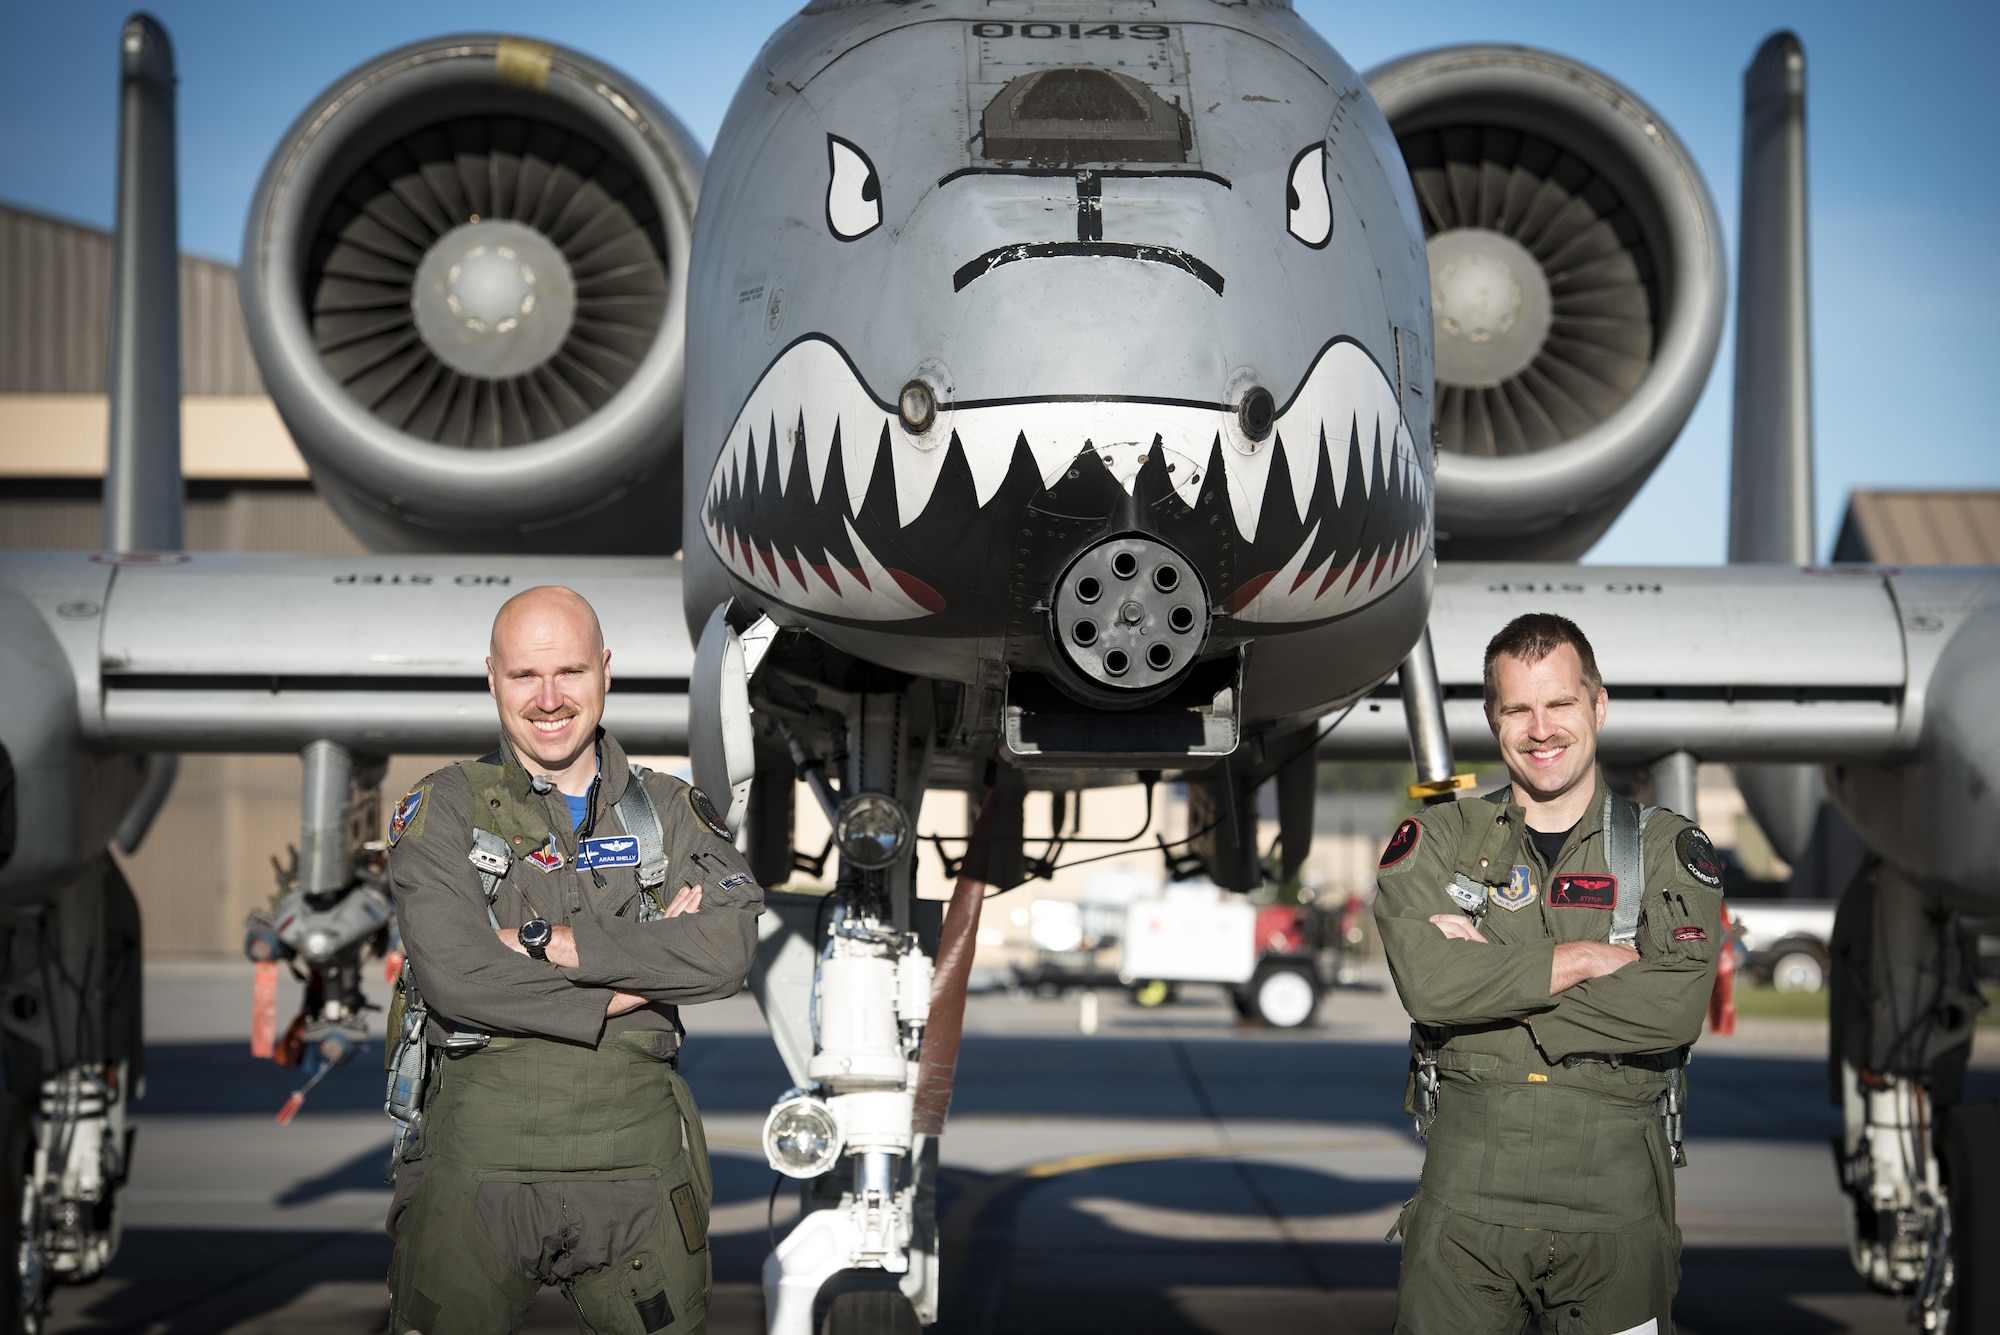 Maj. Matthew Shelly, 23 Wing director of inspections, left, and Capt. Christopher Shelly, 76th Fighter Squadron chief of standards and evaluations, pose for a photo with an A-10C Thunderbolt II, April 8, 2017, at Moody Air Force Base, Ga. The brothers flew in formation together for the first time, fulfilling their childhood dream while also contributing to total force integration, the use of multiple components of the Air Force, which can include active duty, reserve or guard. (U.S. Air Force photo by Airman 1st Class Lauren M. Sprunk)